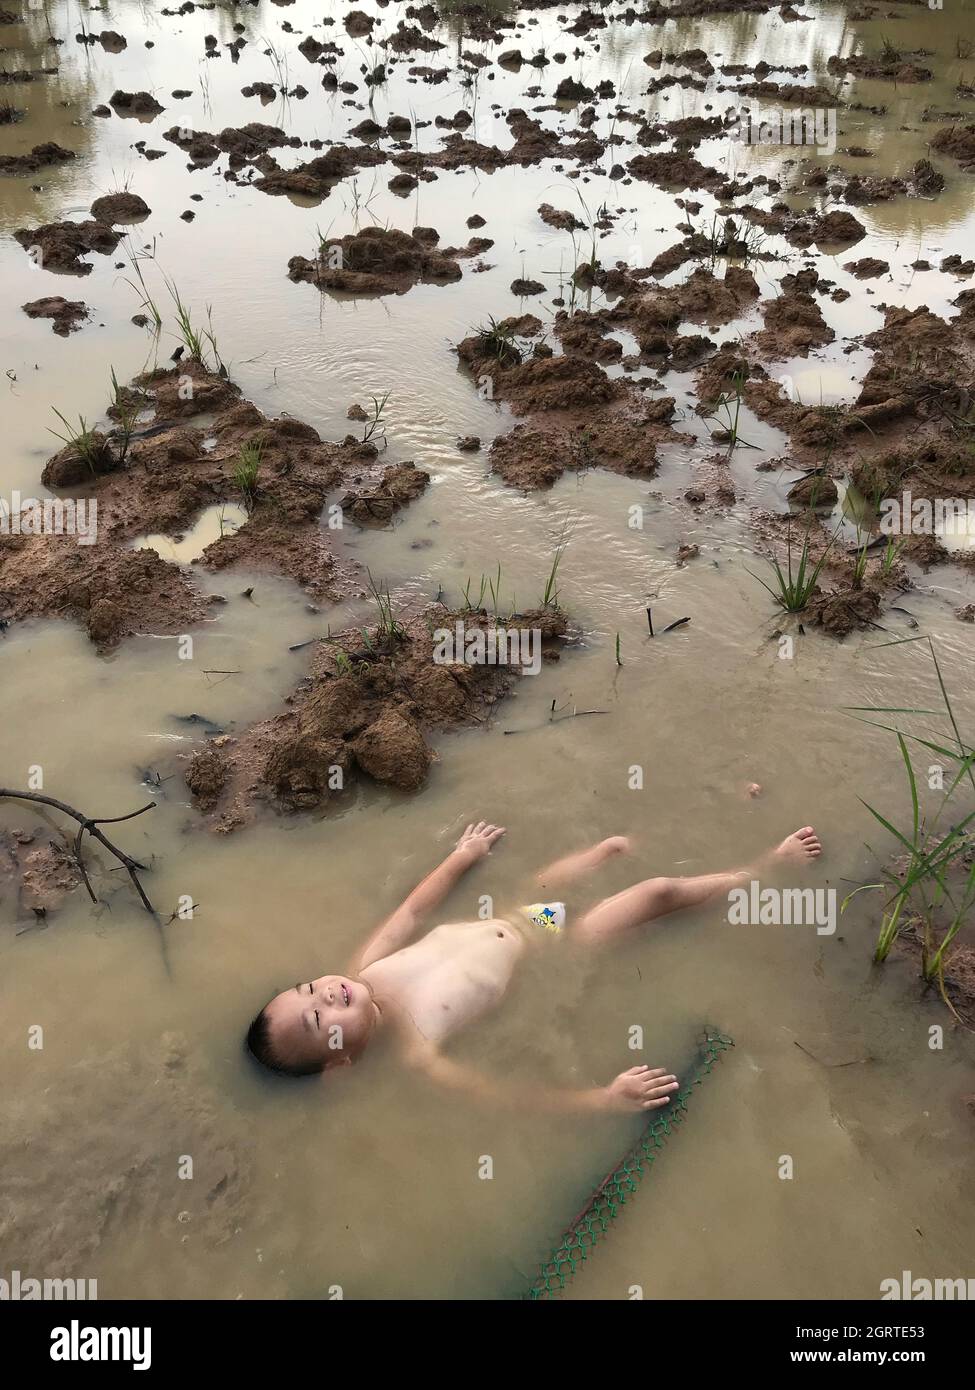 High Angle View Of Shirtless Boy Lying In Muddy Water Stock Photo